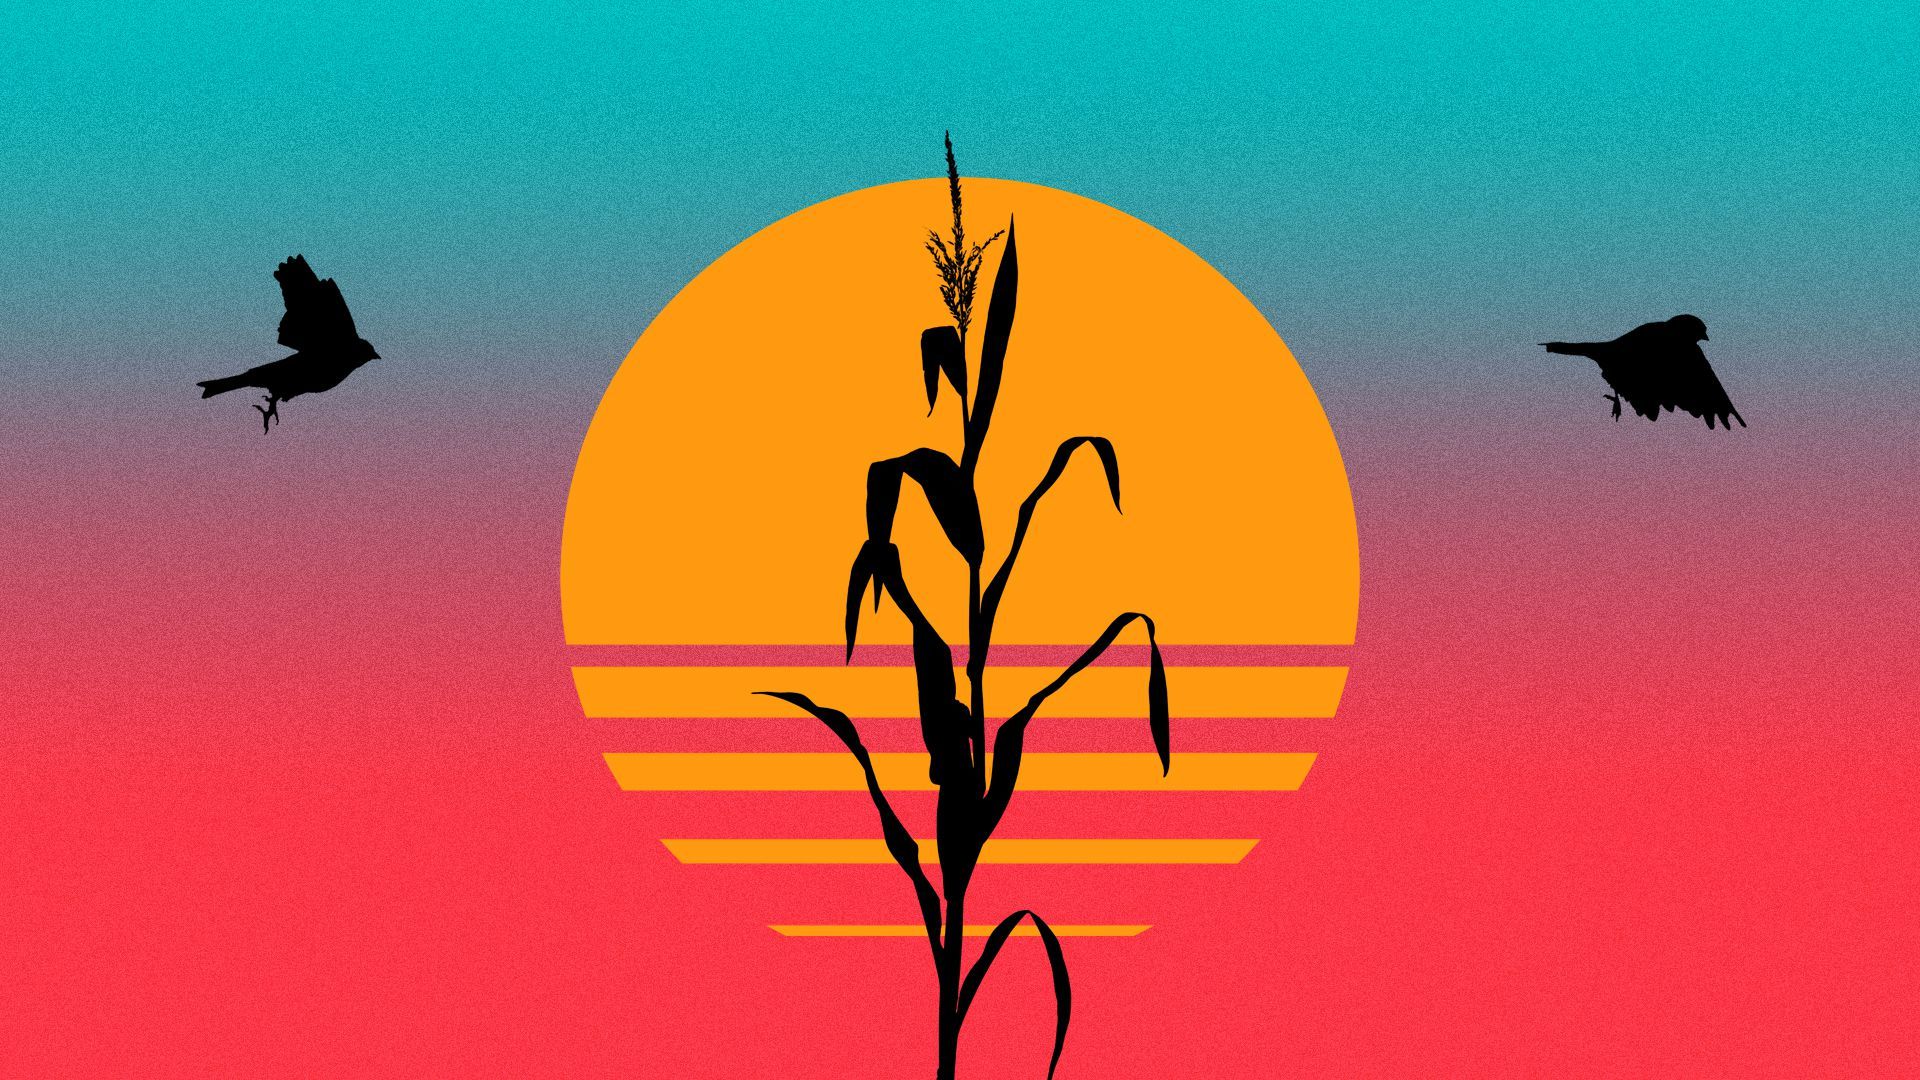 Illustration of a cornstalk and two goldfinches silhouetted against a sun and sky in neon colors. 